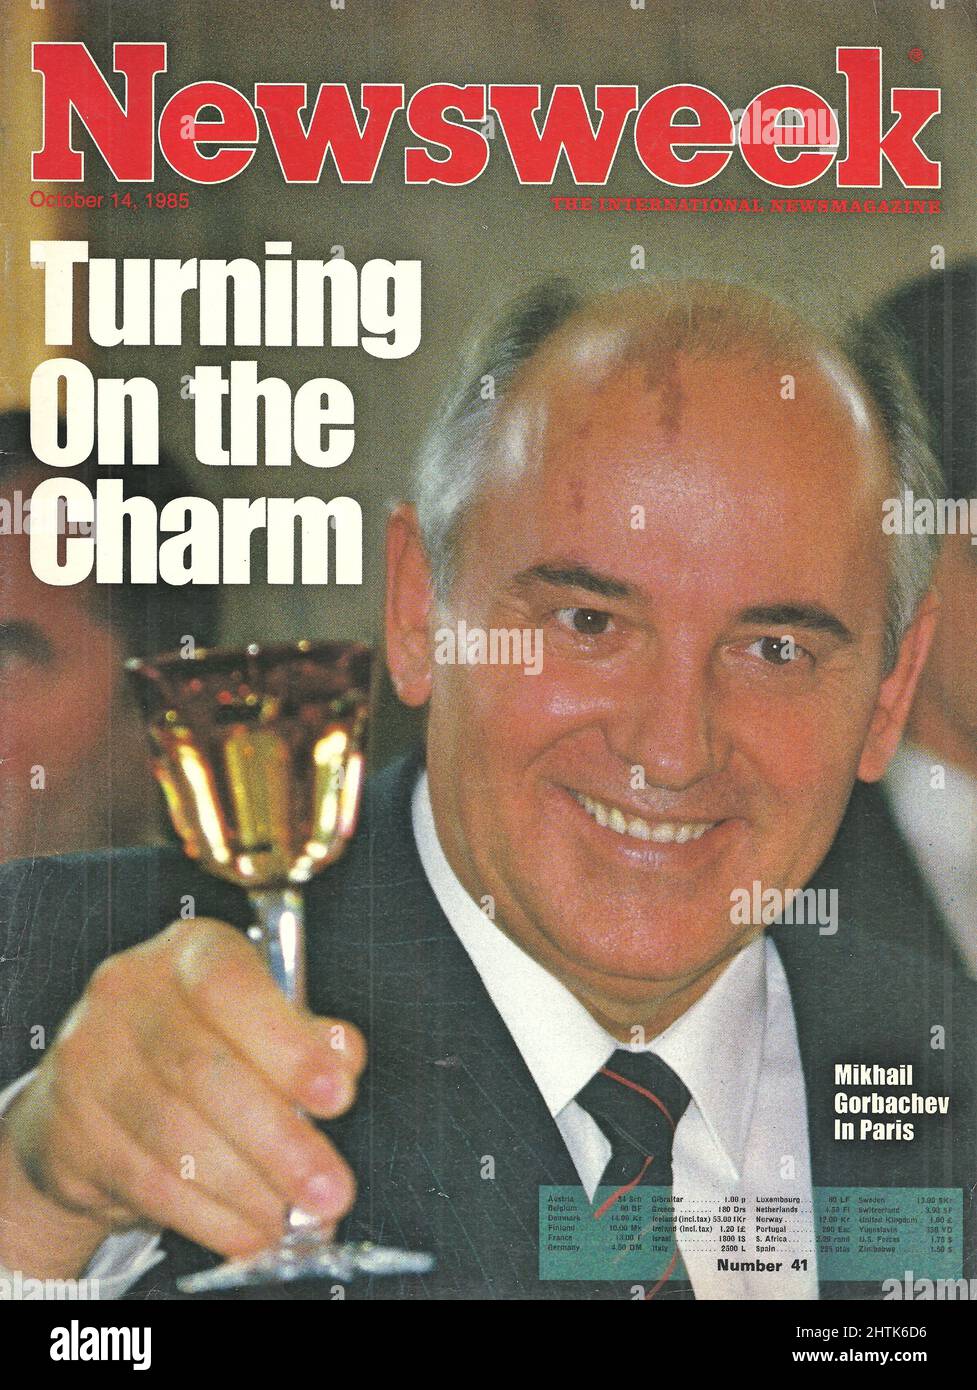 Newsweek cover October 14 1985 Turning on the charm Mikhail Gorbachev in Paris Stock Photo